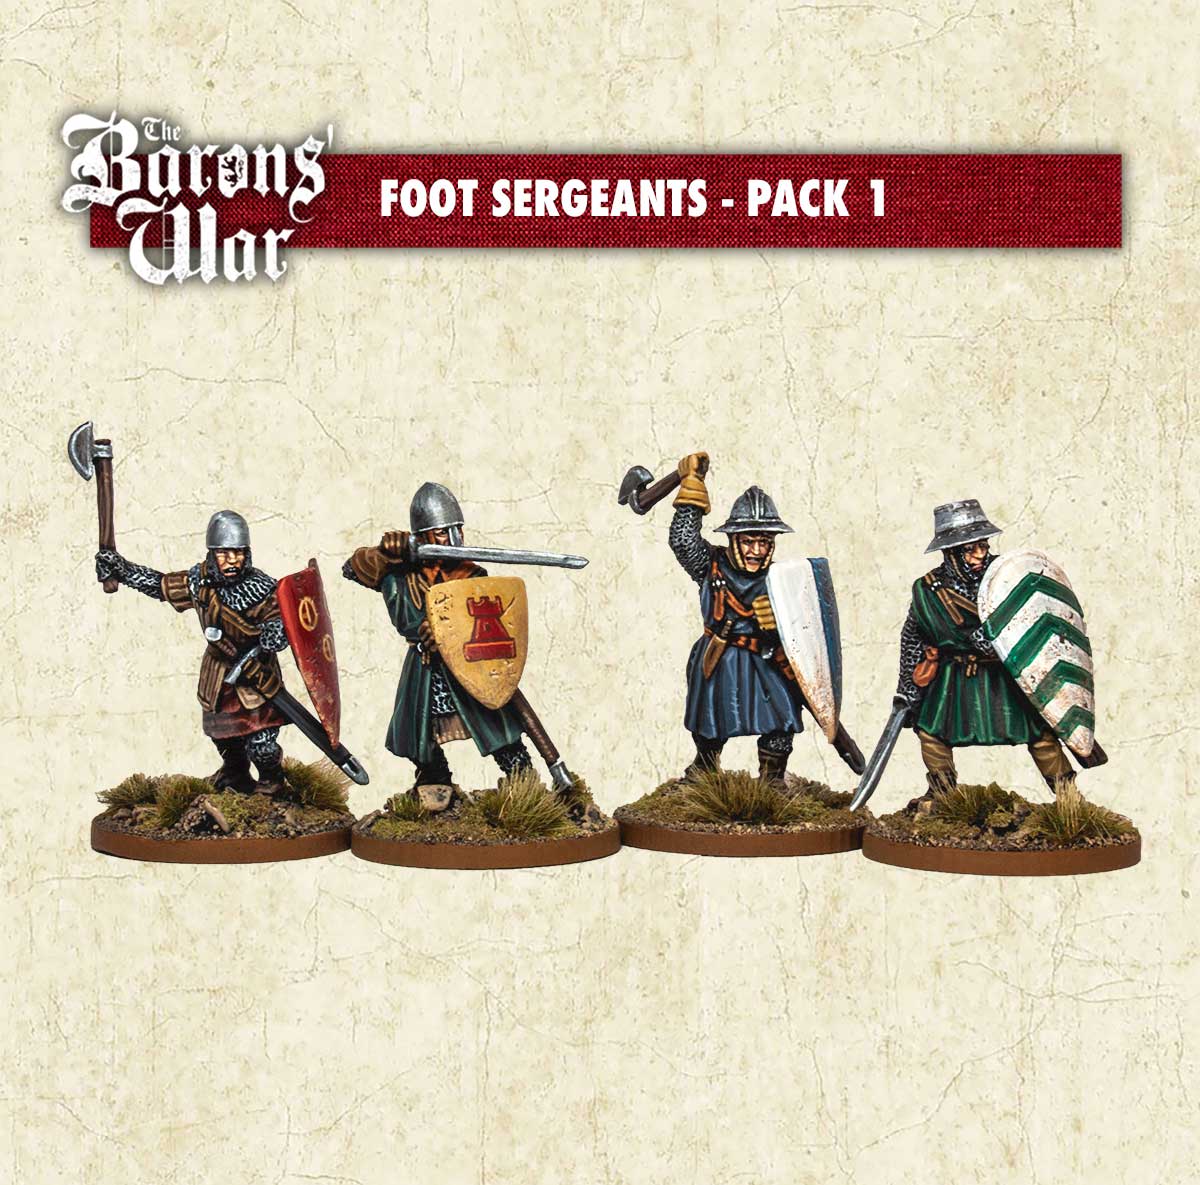 Foot Sergeants w/ Hand Weapons 1 Footsore medieval historical miniatures